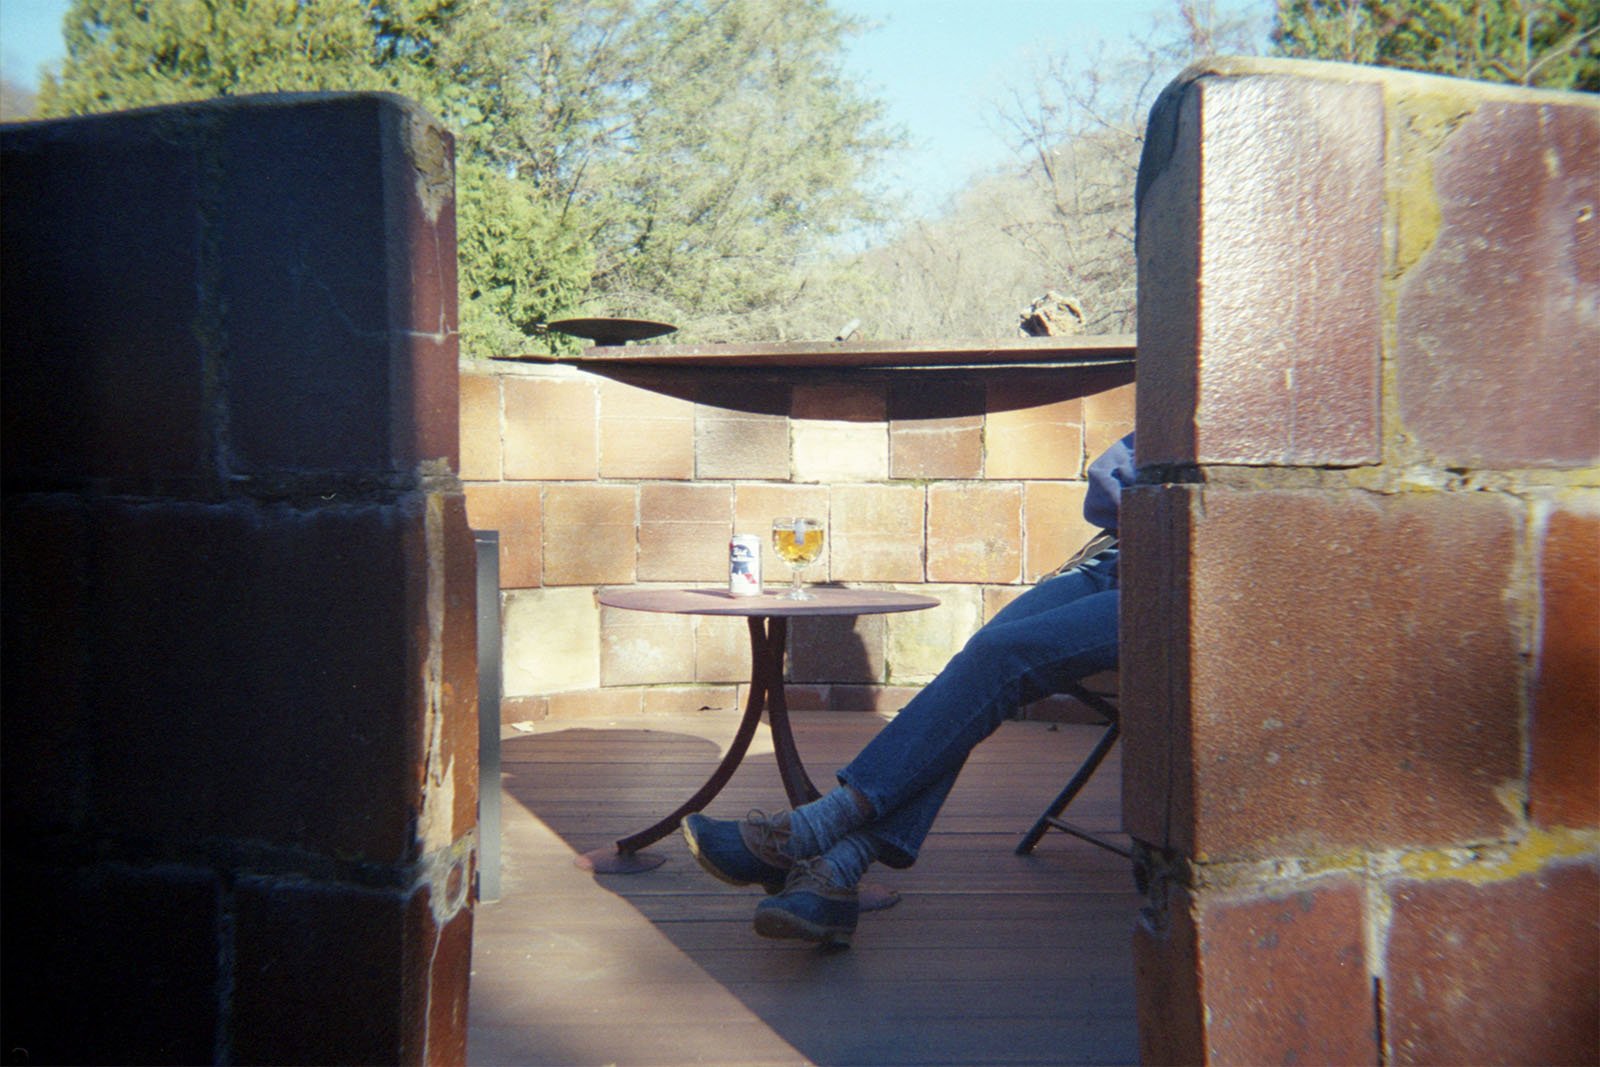 A person sits at an outdoor table inside a circular brick structure. On the round table are a can of beer and a half-full beer glass. The person's legs are crossed, and trees and sky are visible in the background. The scene evokes a relaxed and casual setting.